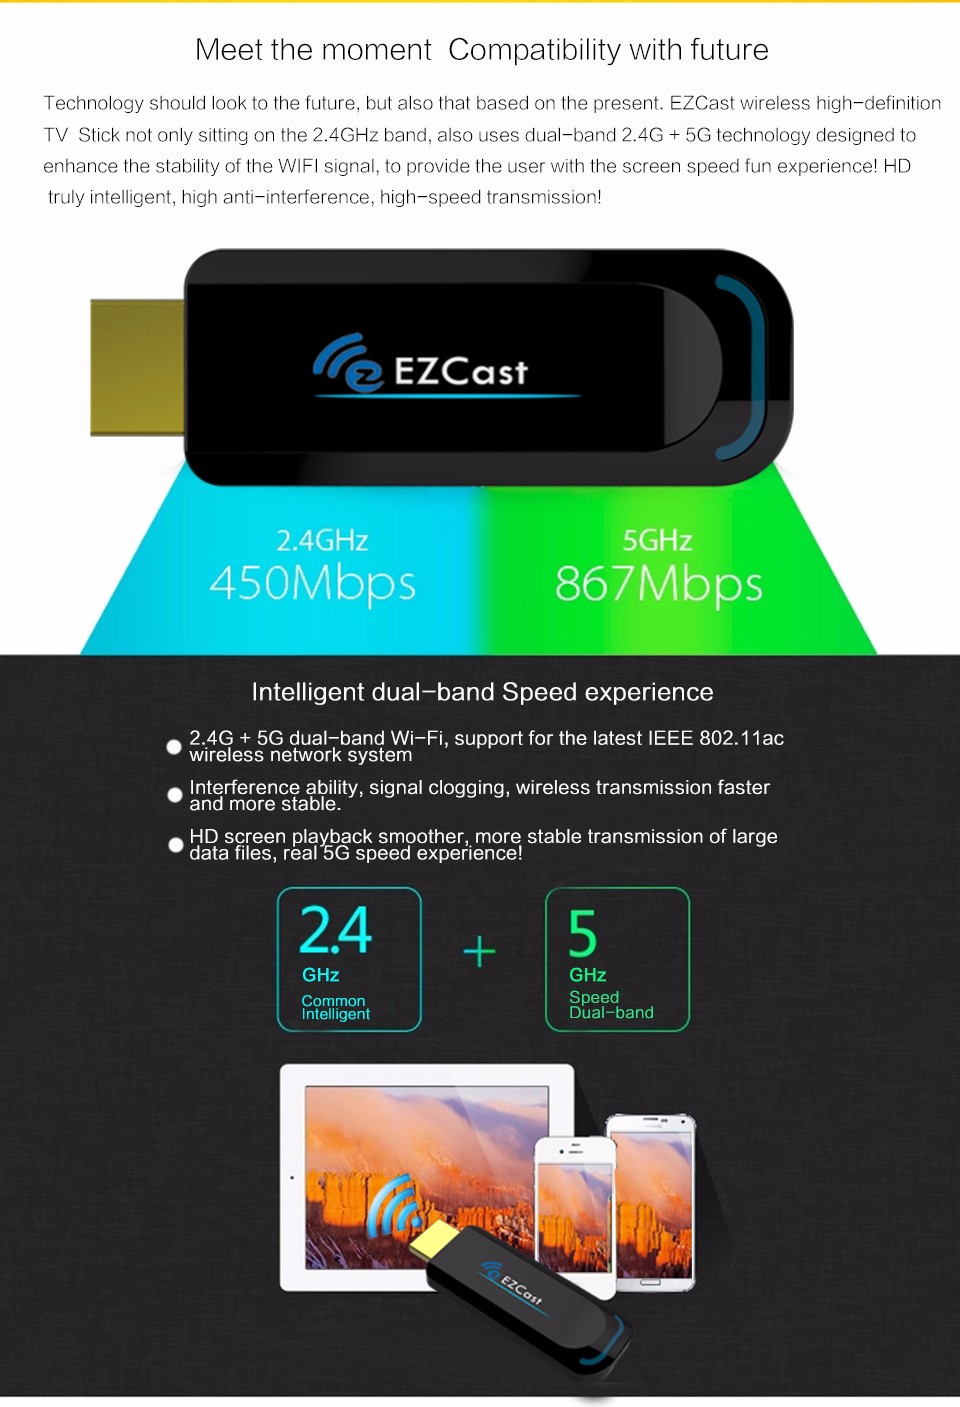 A1-Ezcast-5G-Airplay-DLNA-Miracast-HD-Display-Dongle-for-Android-IOS-Window-OS-1107750